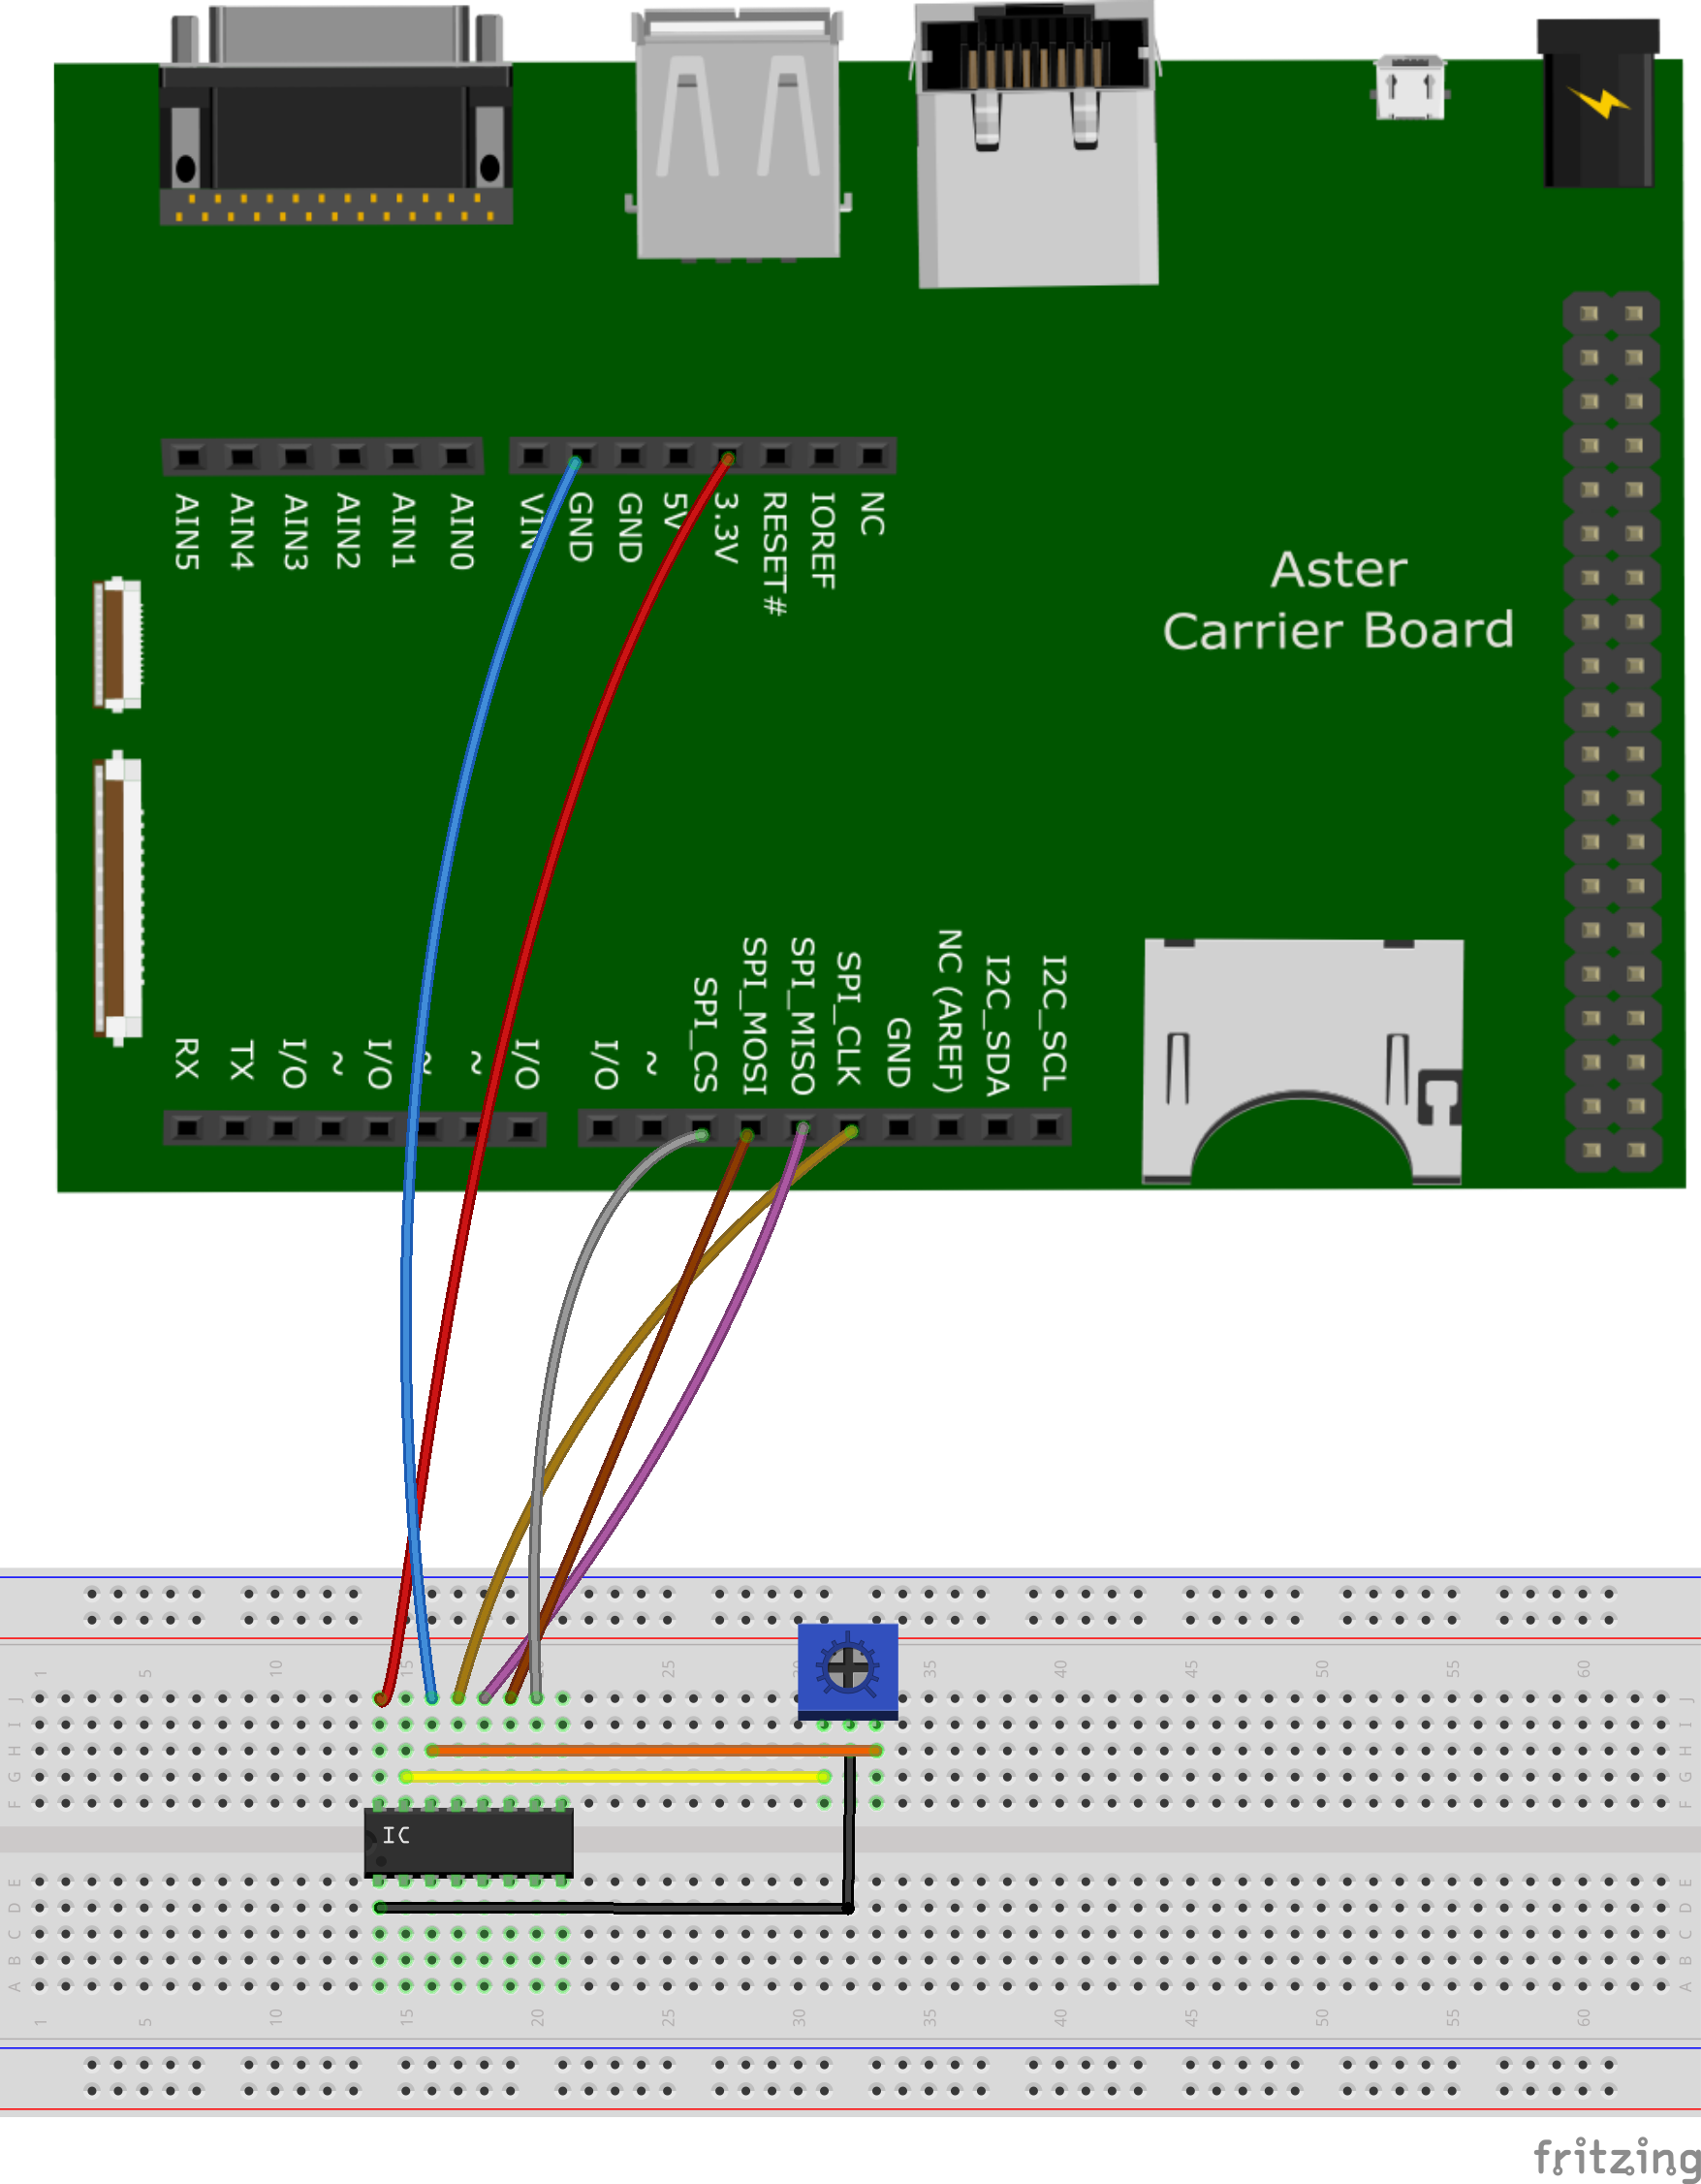 Aster Carrier Board - Connected